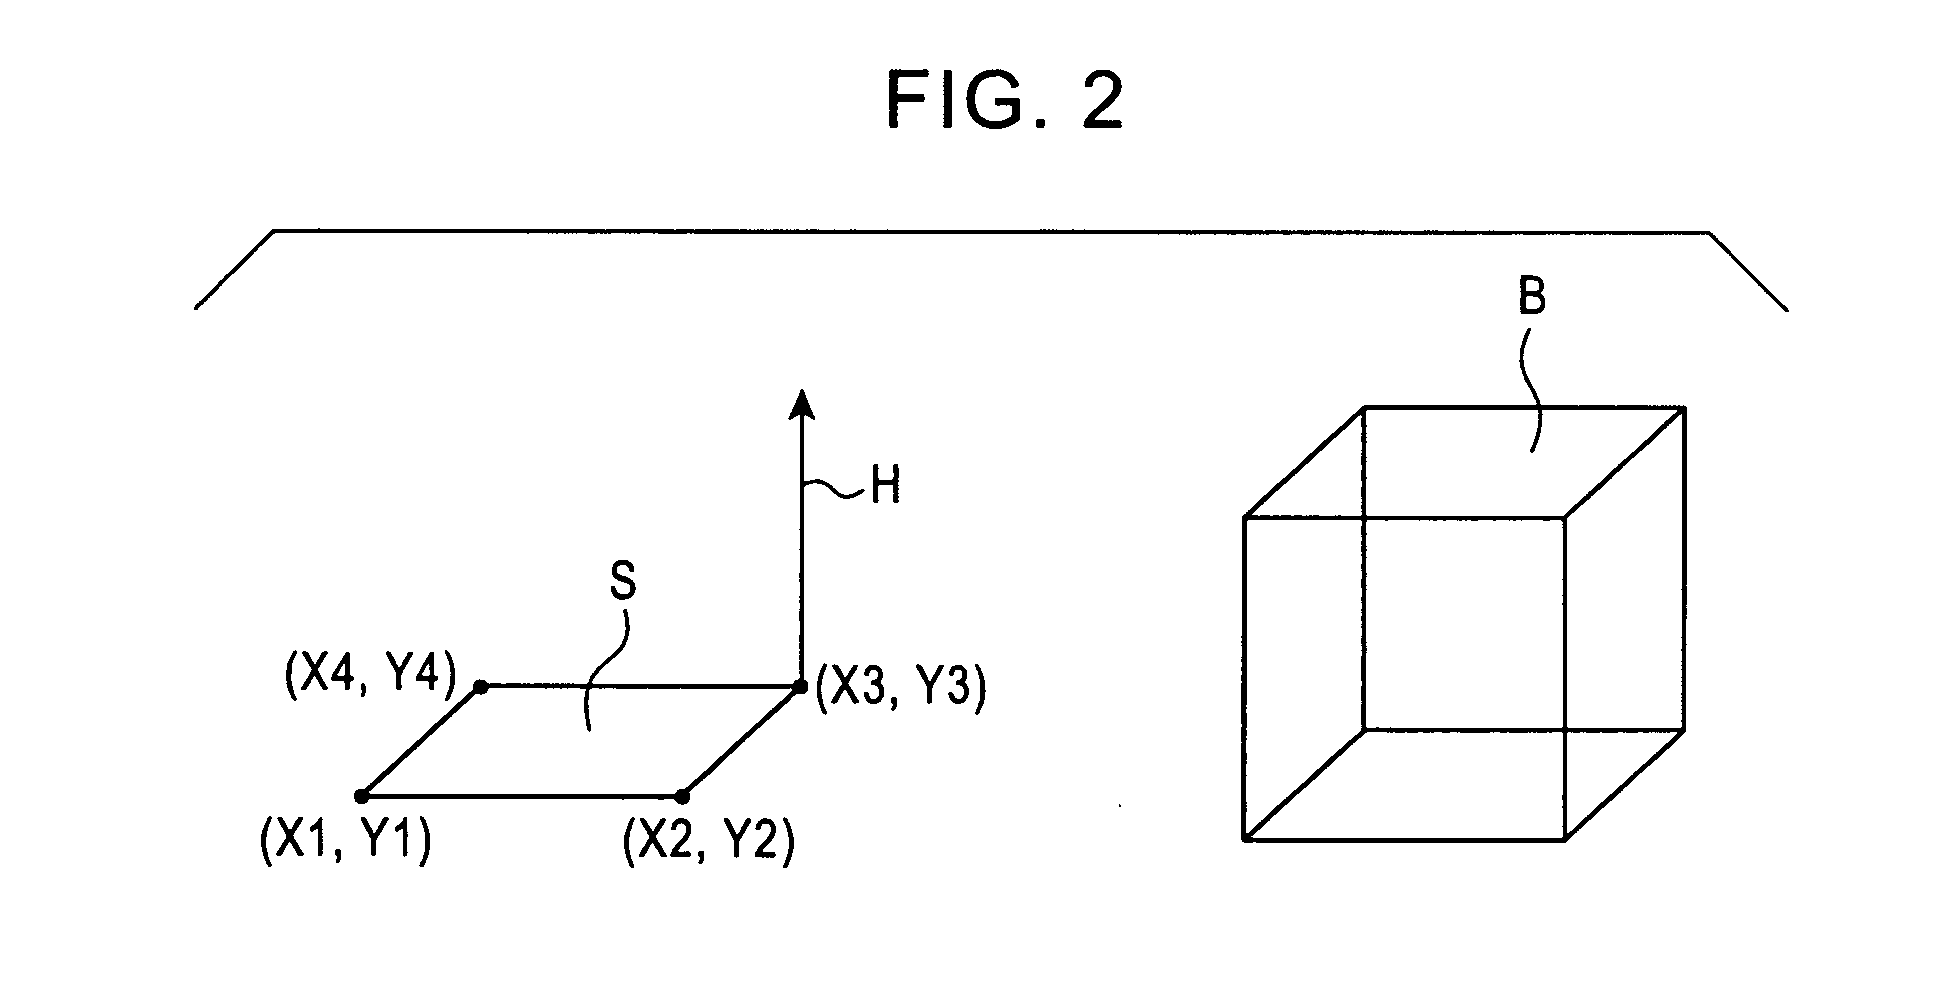 Method and apparatus for displaying a night-view map